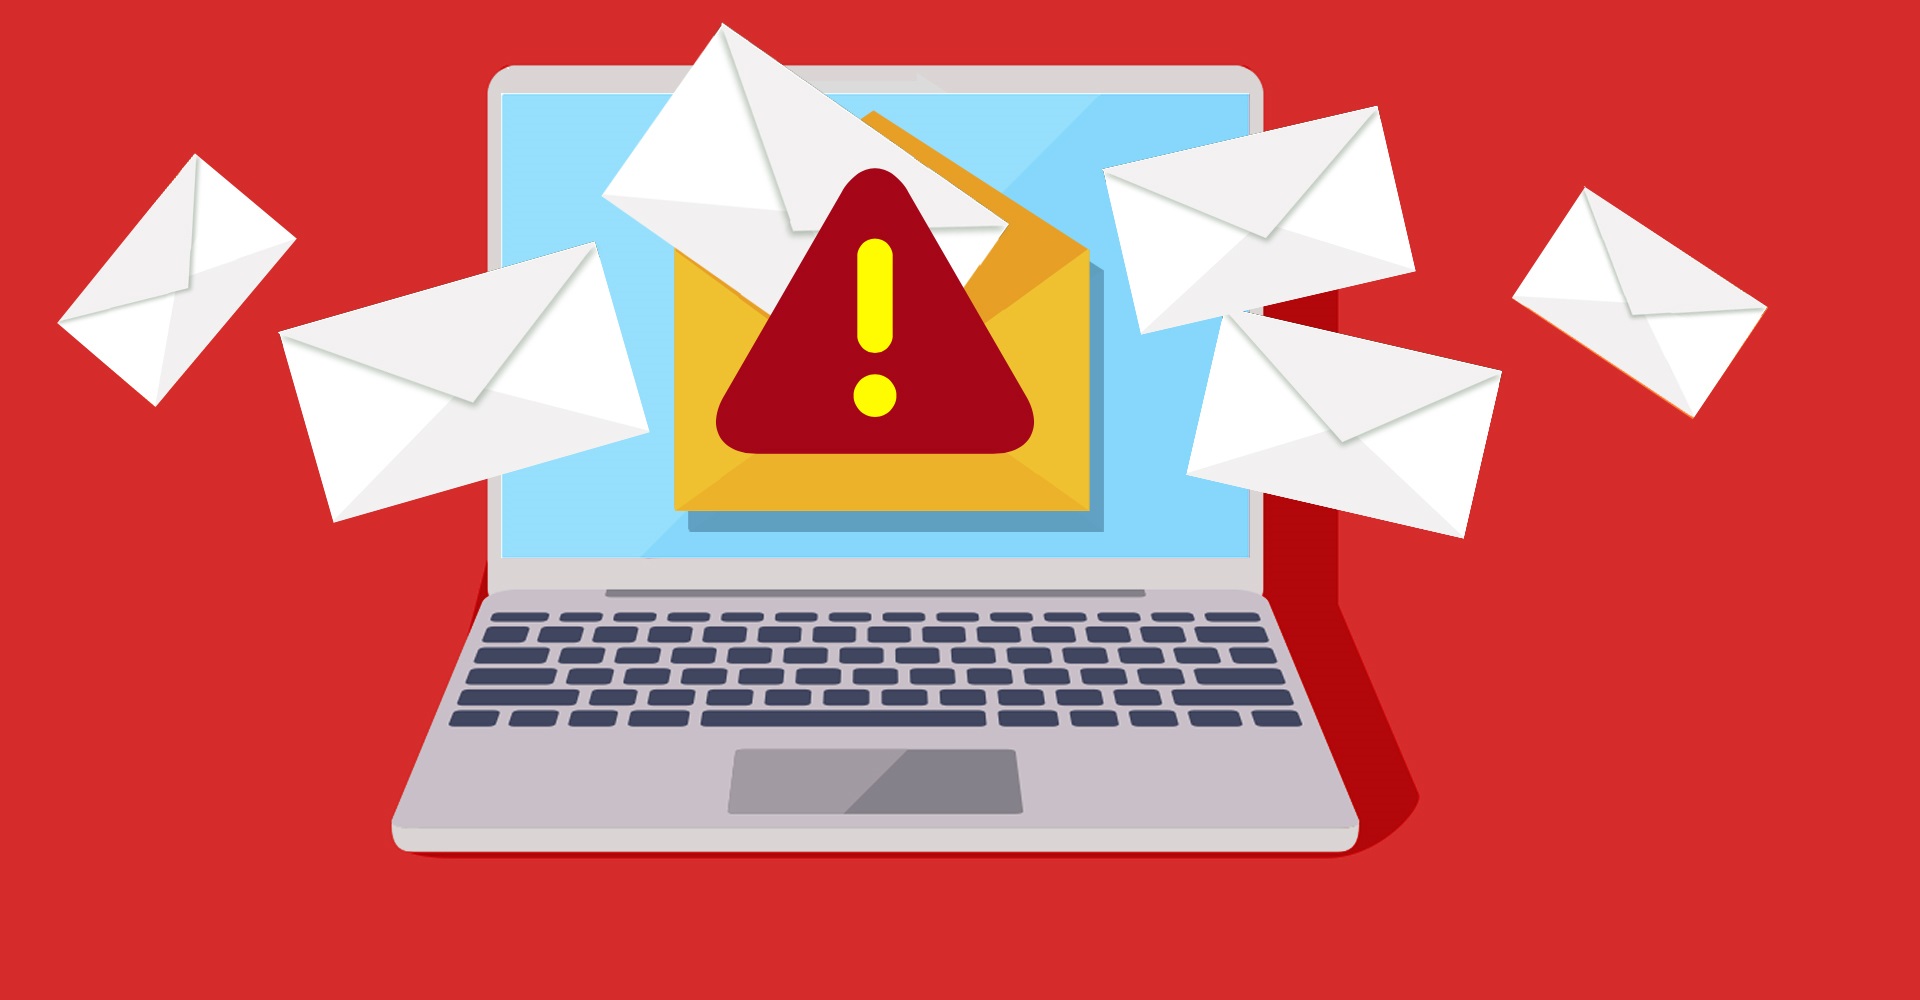 10 Simple Tips to Protect You from an Email Hack | Avast